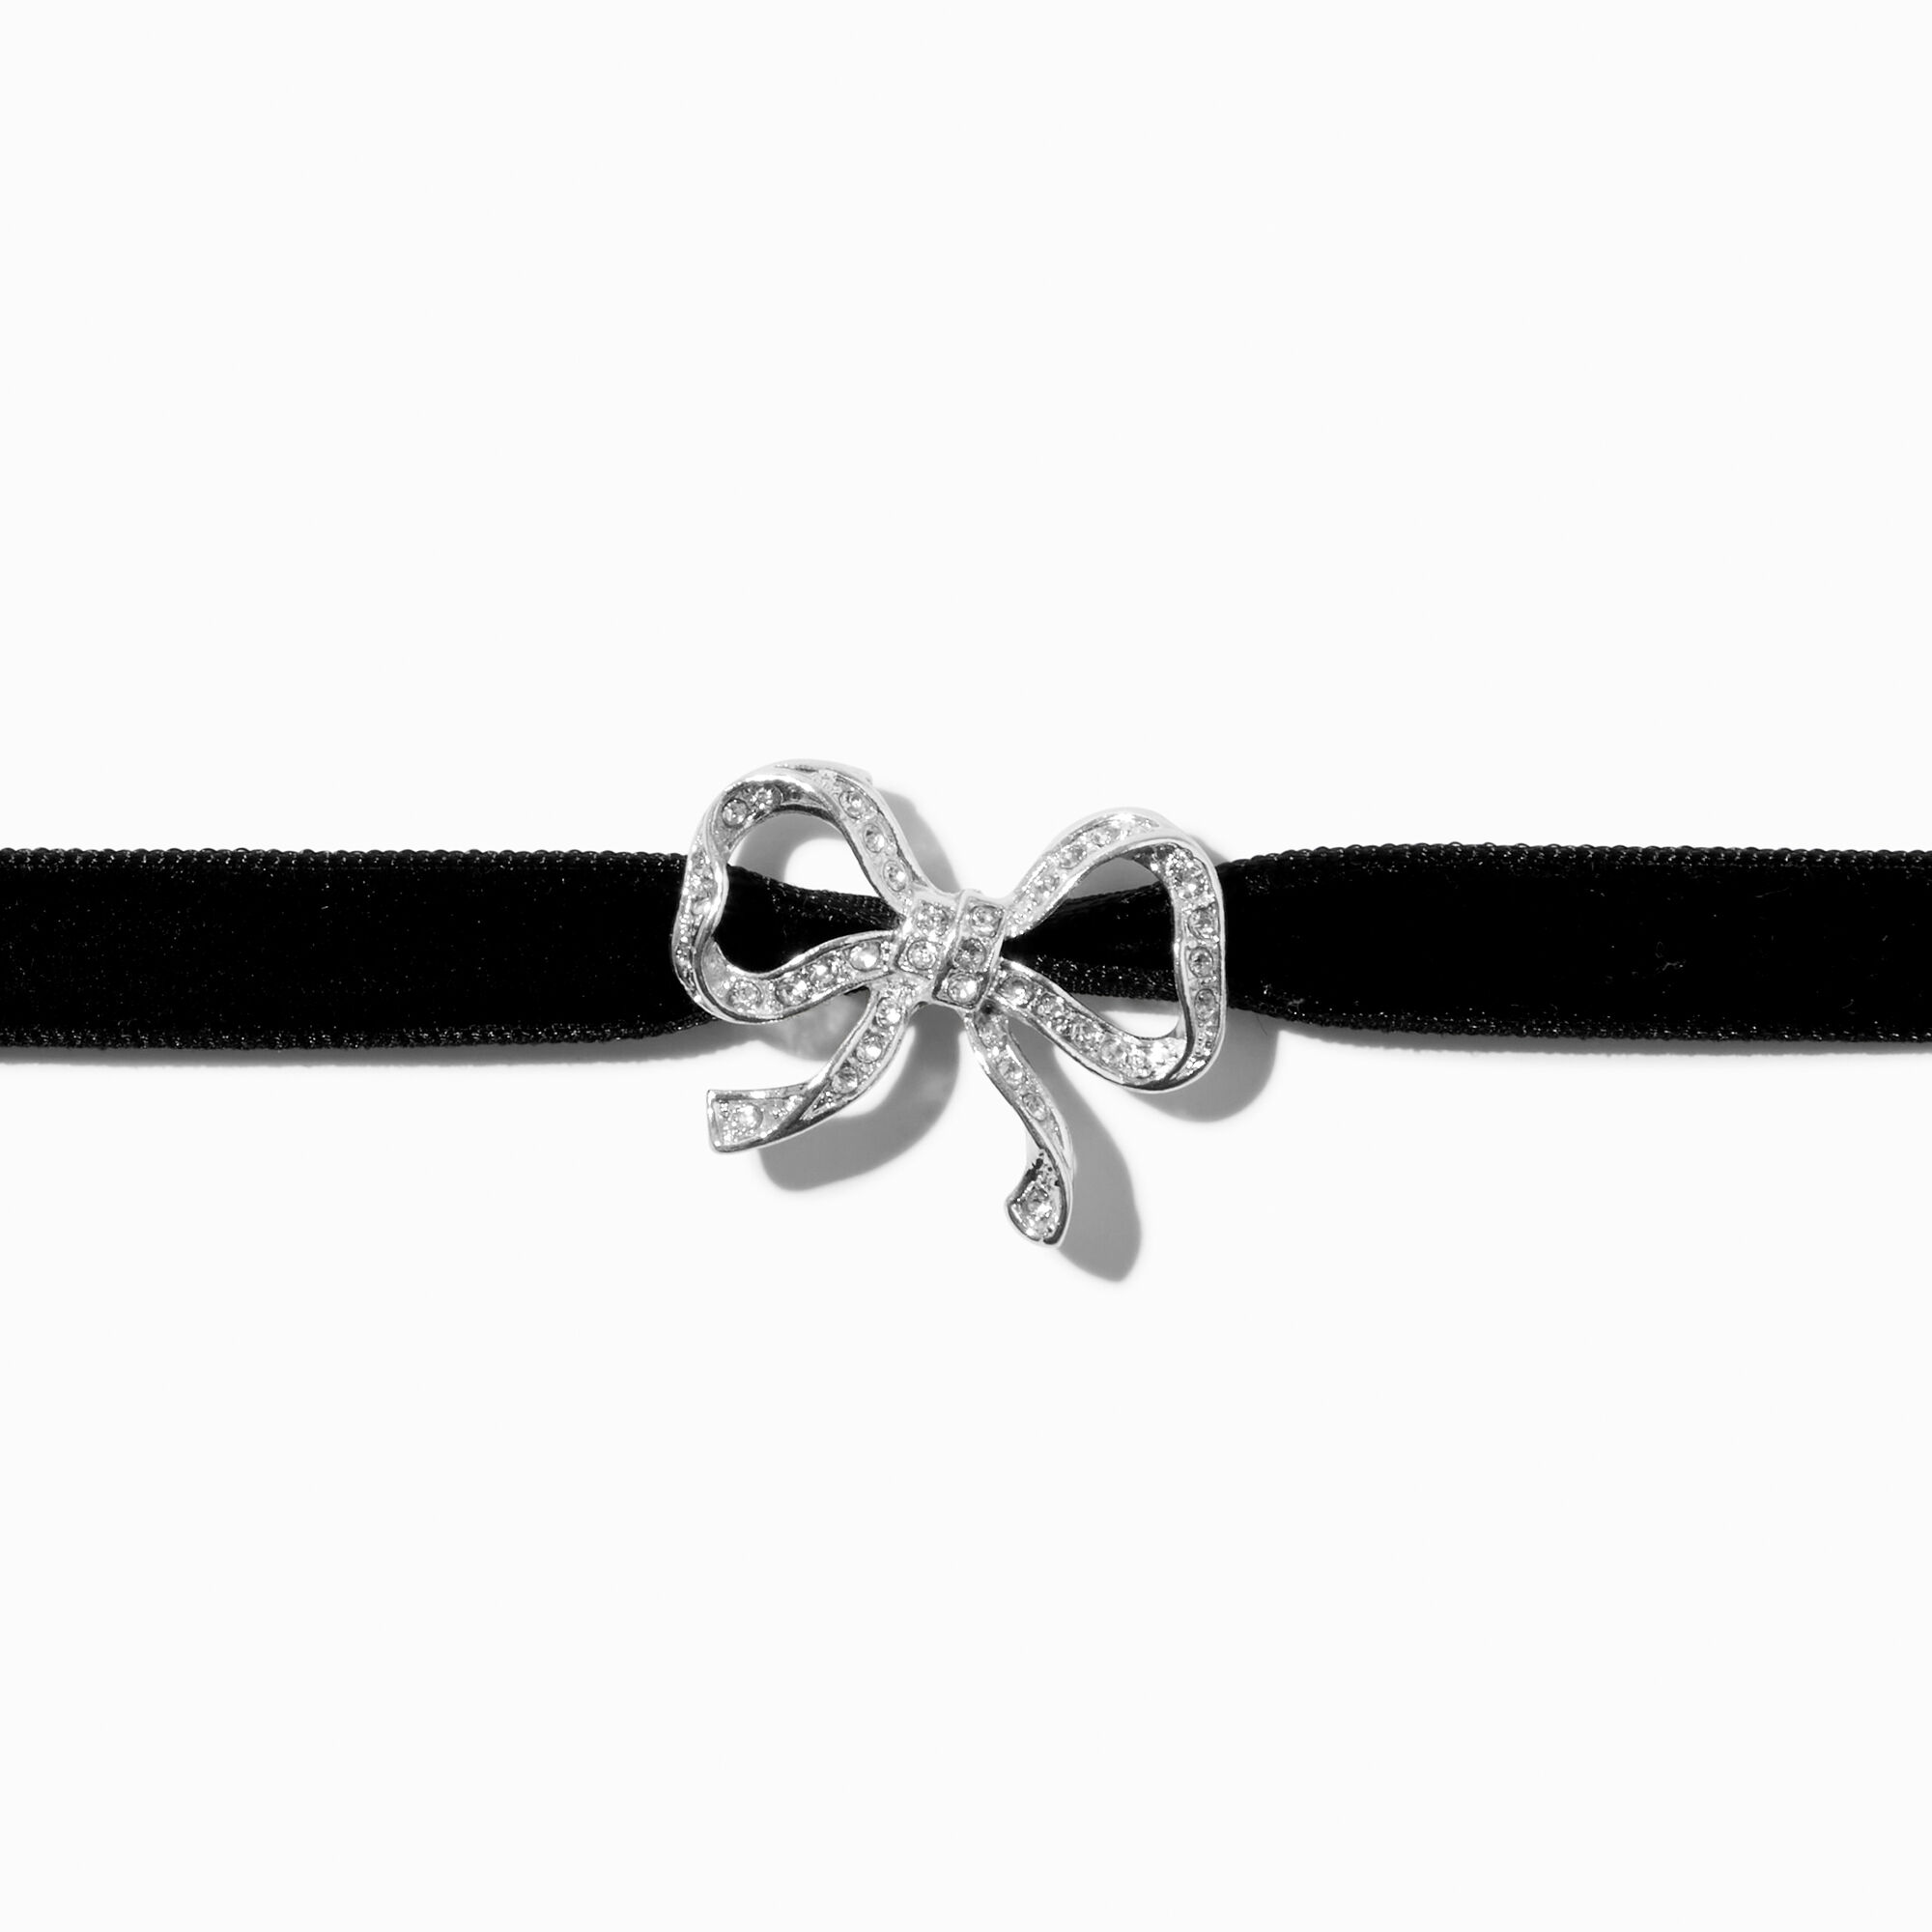 View Claires SilverTone Crystal Bow Pendant Choker Necklace Black information